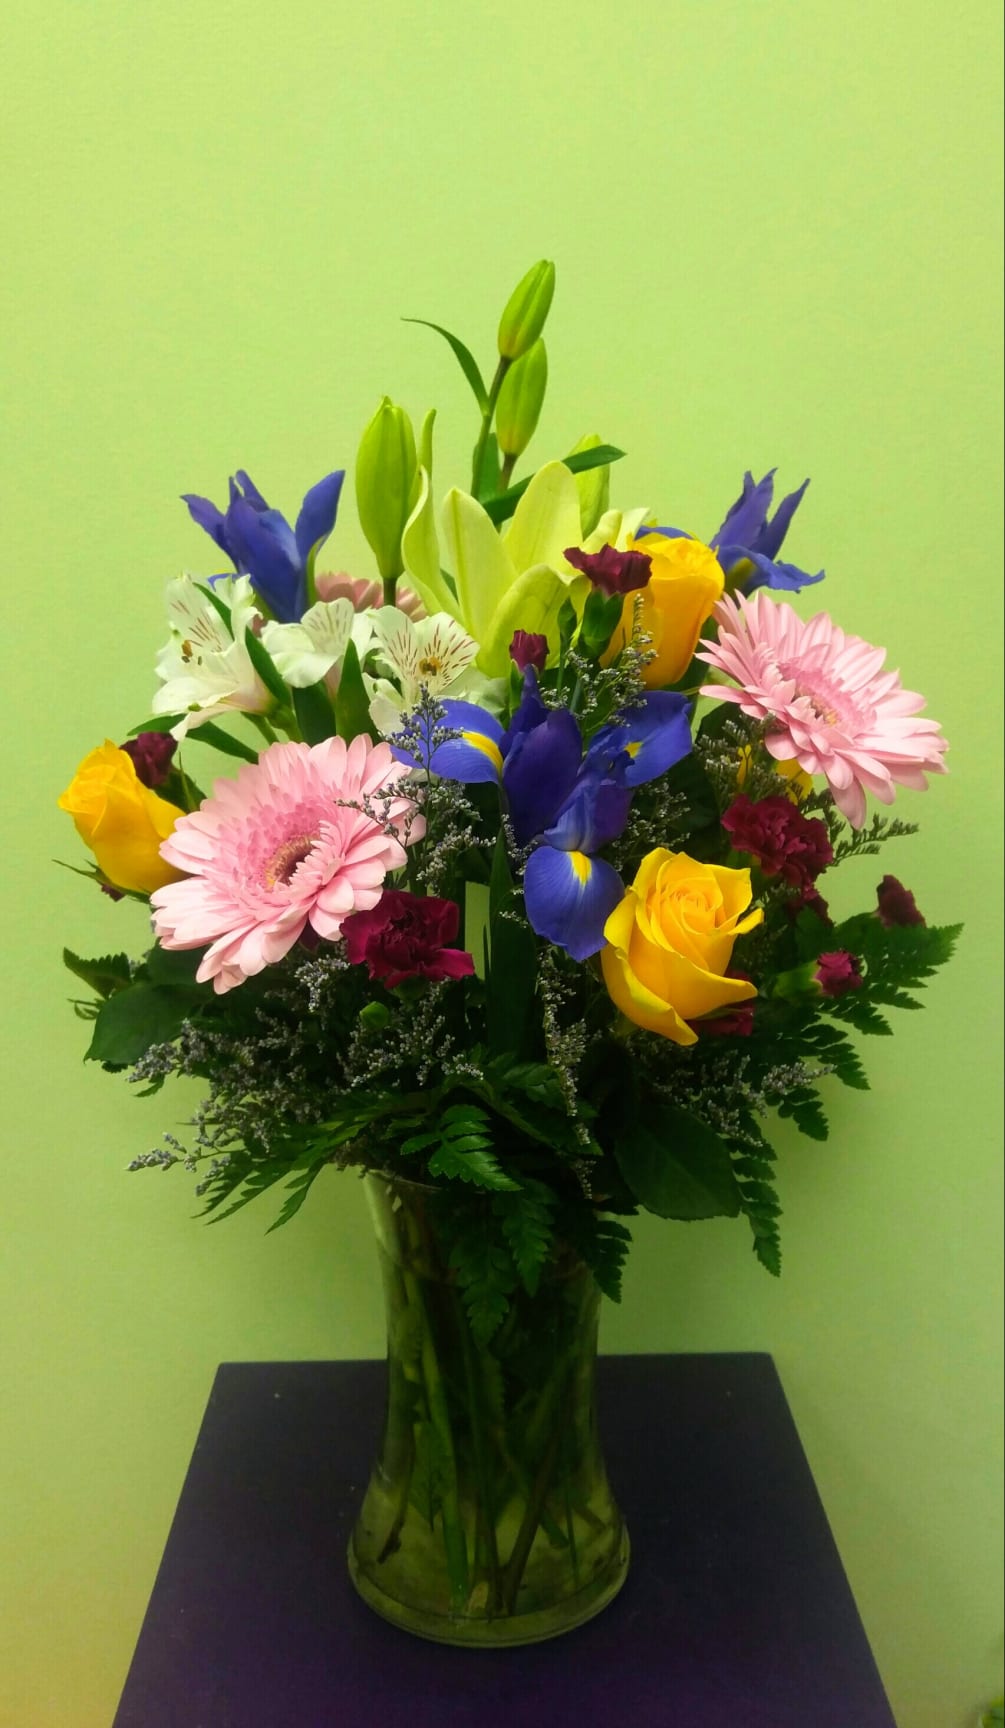 This sensational bouquet is full of spring colors, flowers, and feeling. It